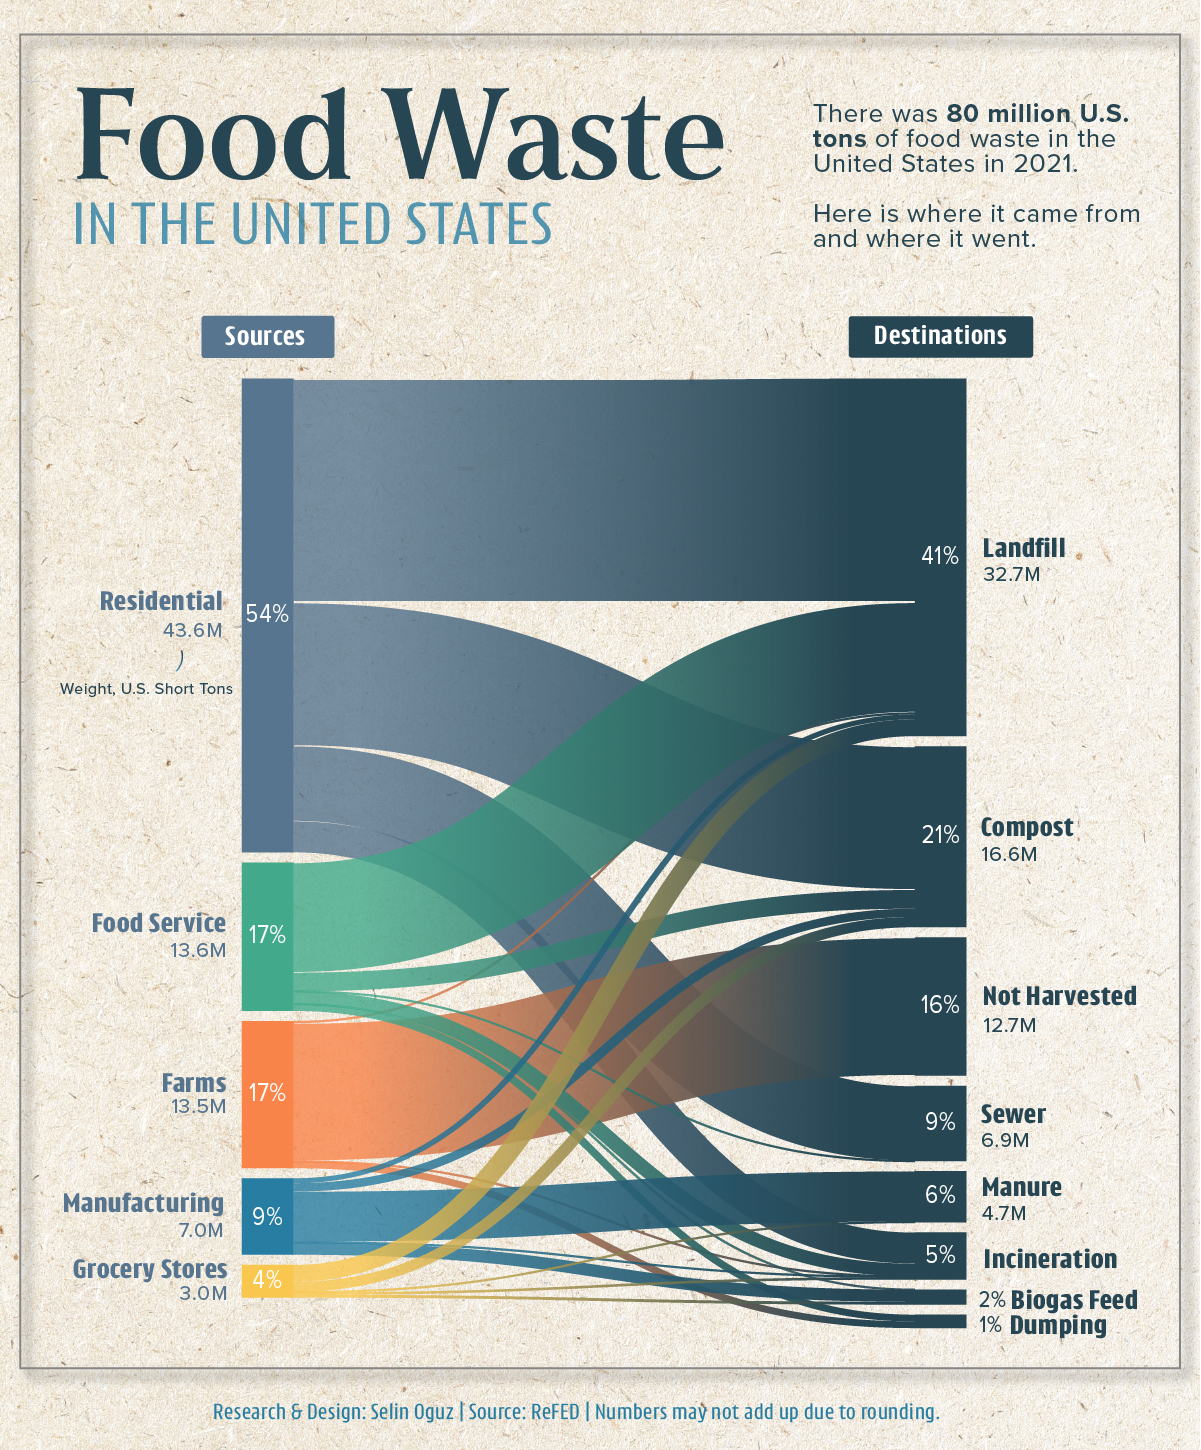 a sankey diagram that follows the sources of food waste in america to their destinations